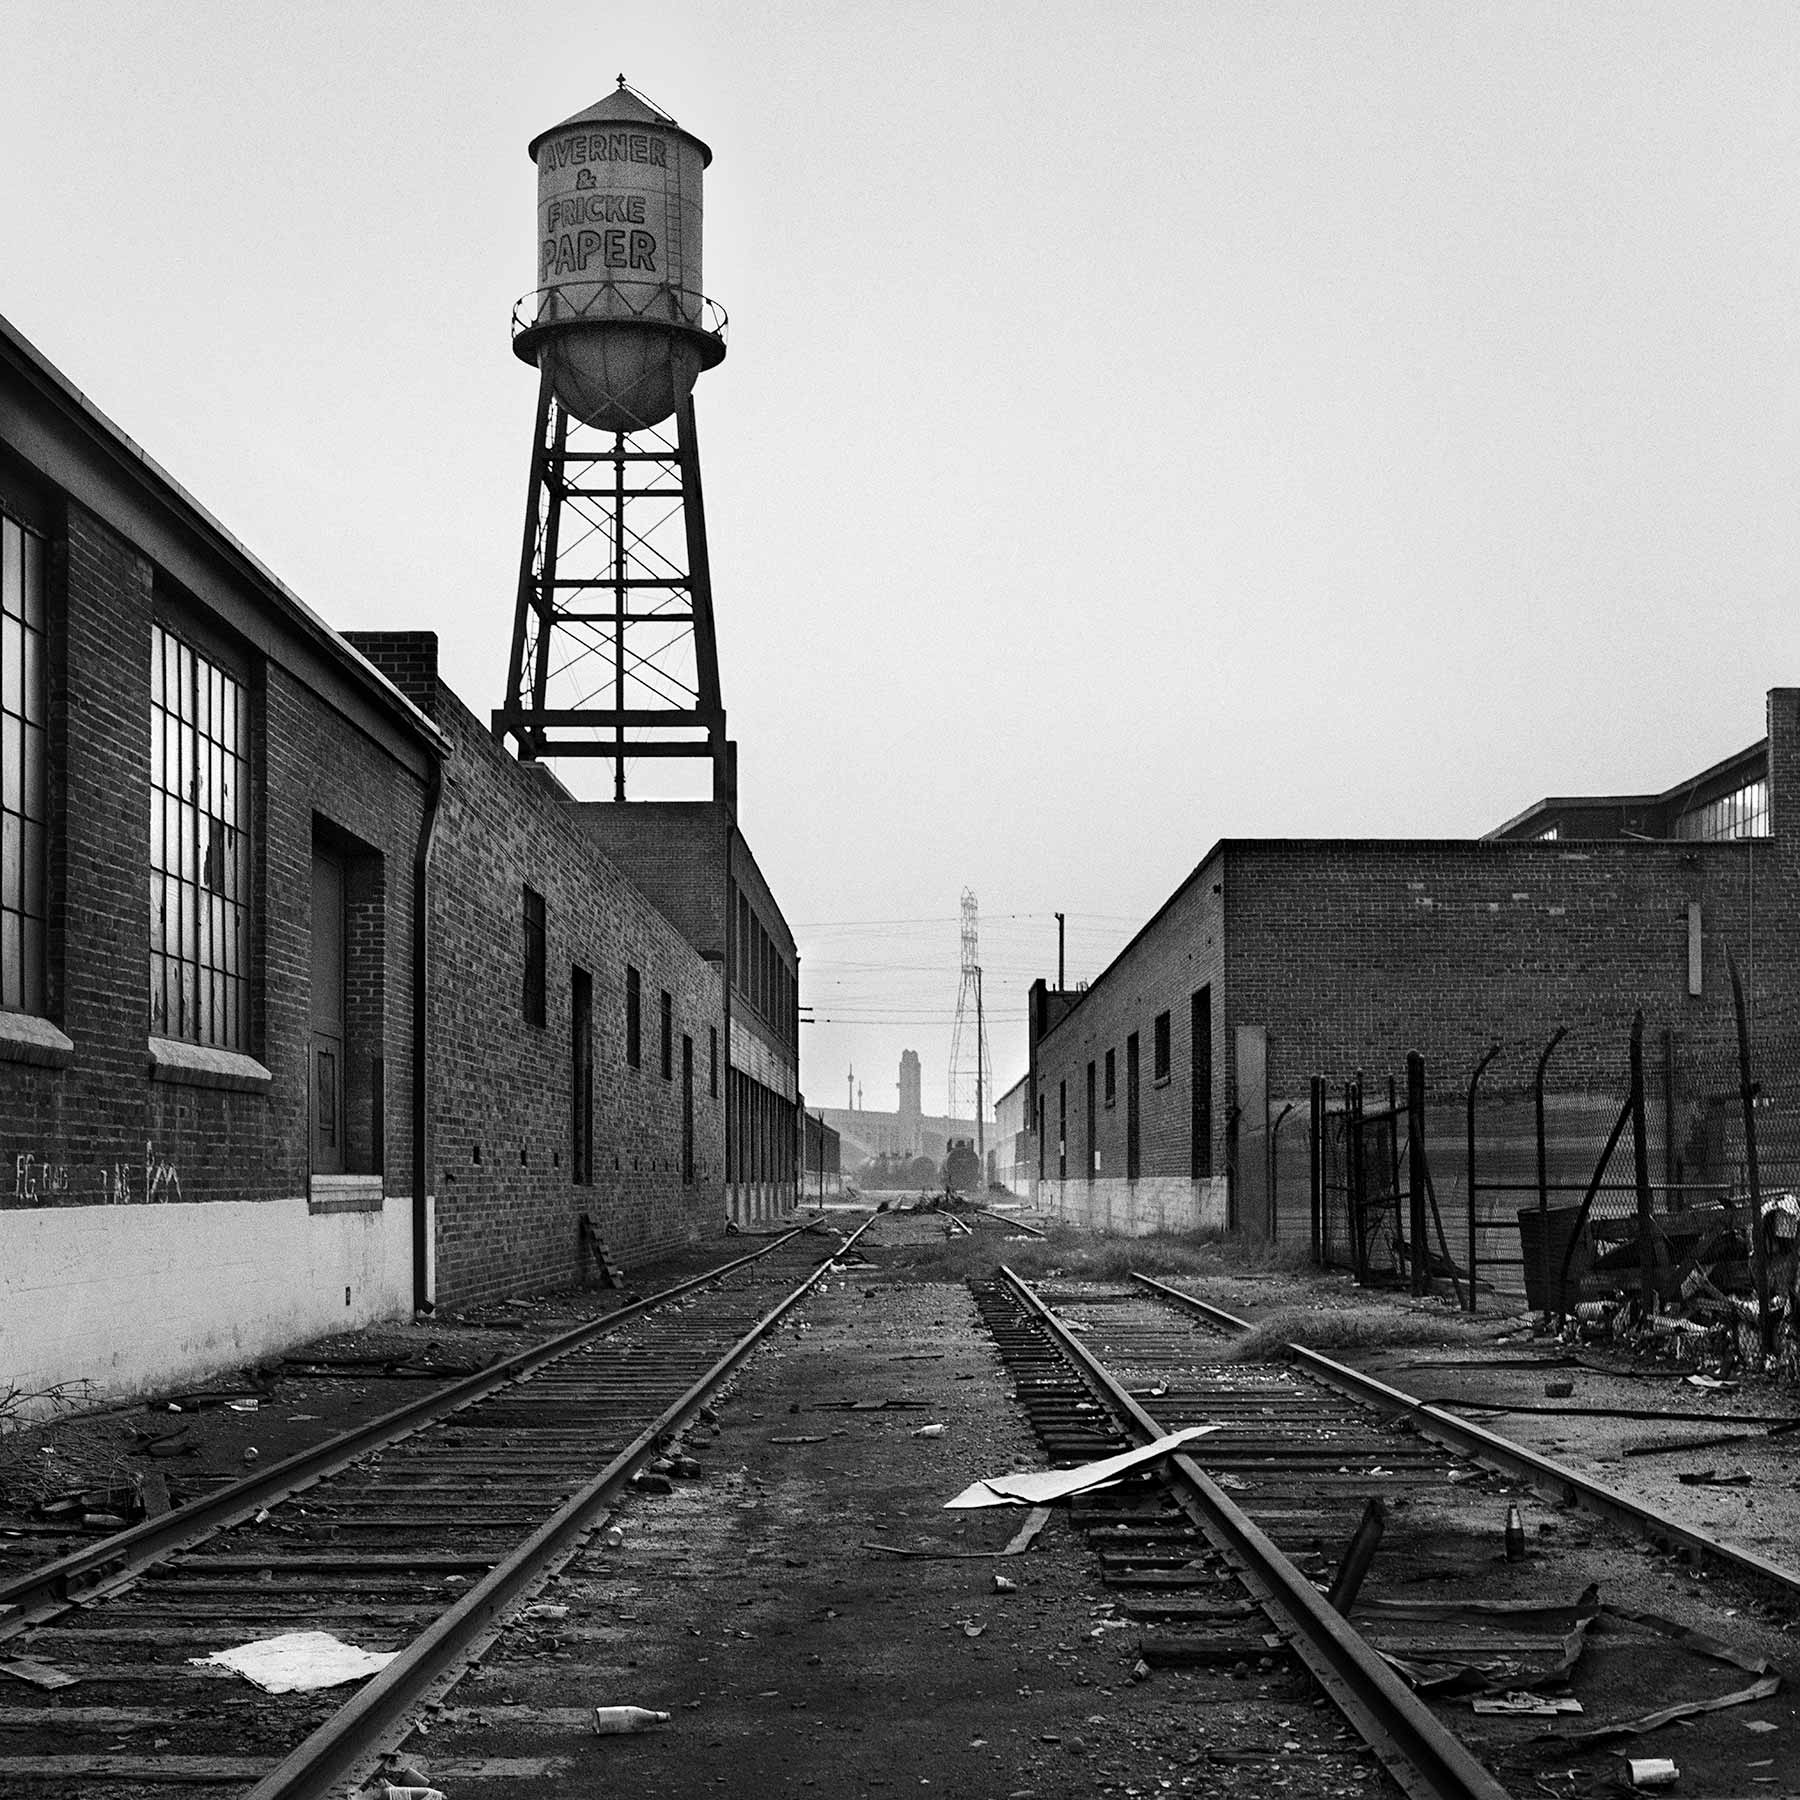 Water tower and littered railroad tracks – Boyle Heights, Los Angeles, California, 1984